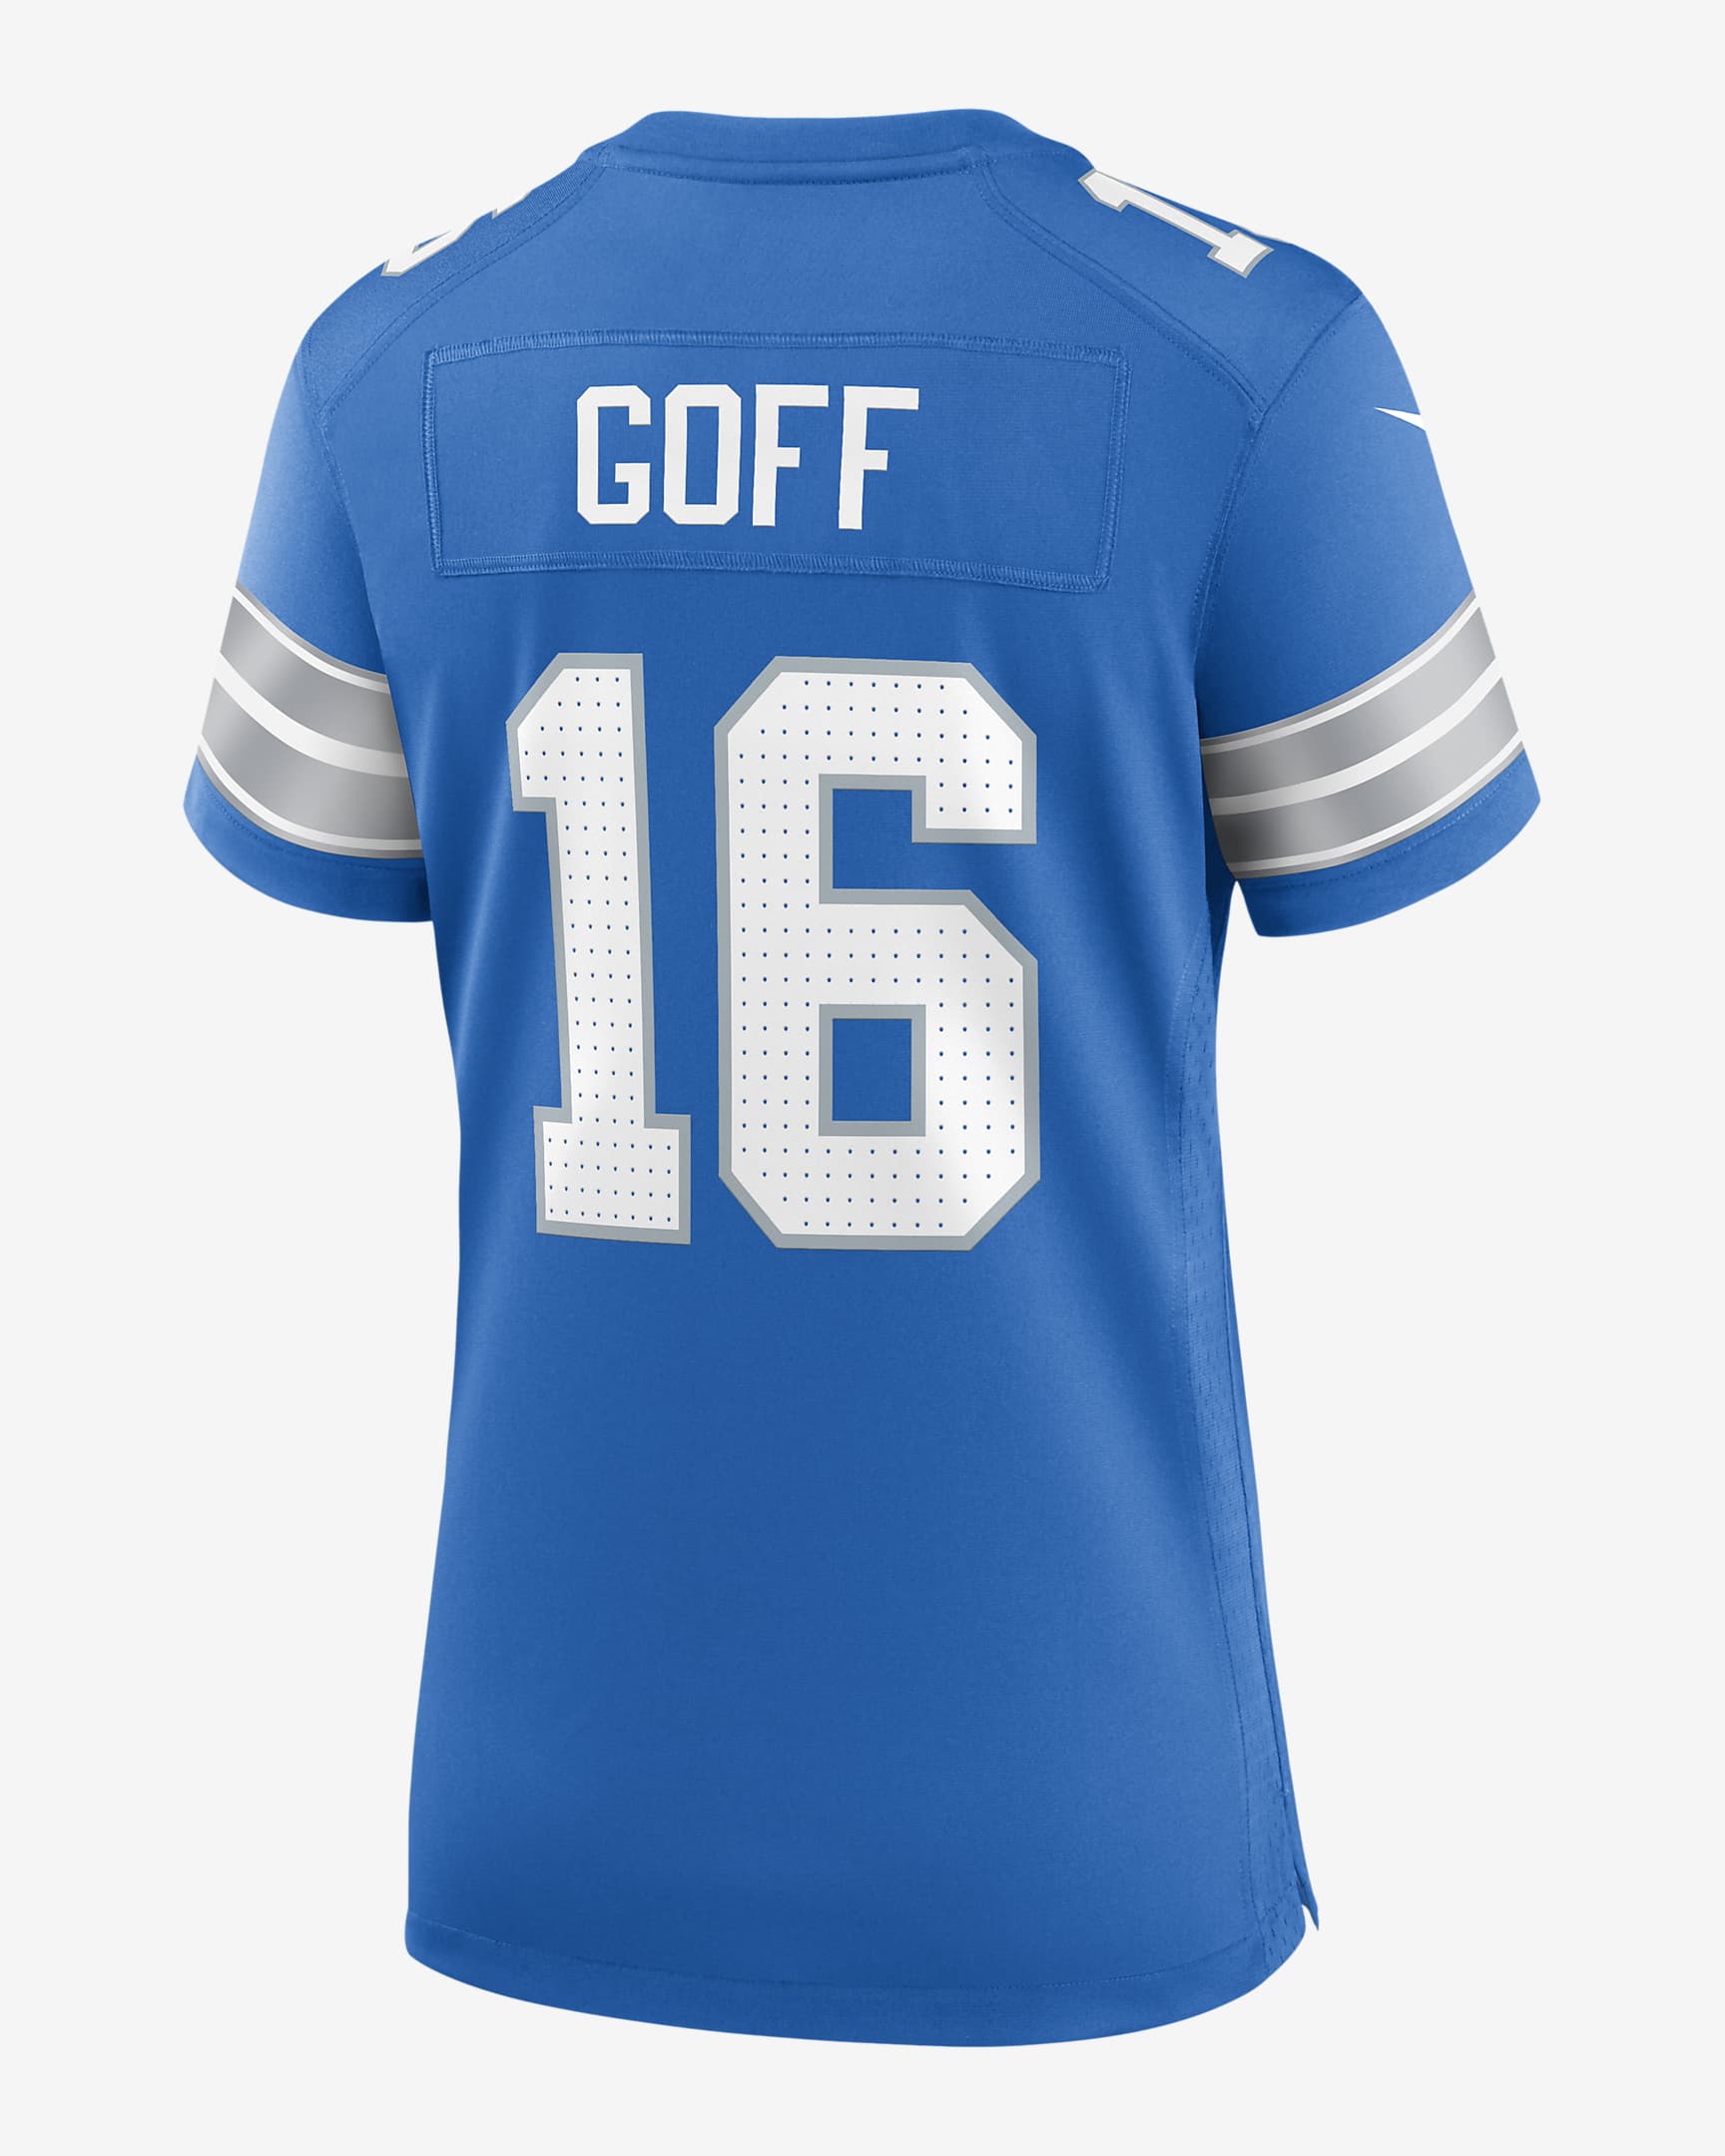 Jared Goff Detroit Lions Women's Nike NFL Game Football Jersey. Nike.com